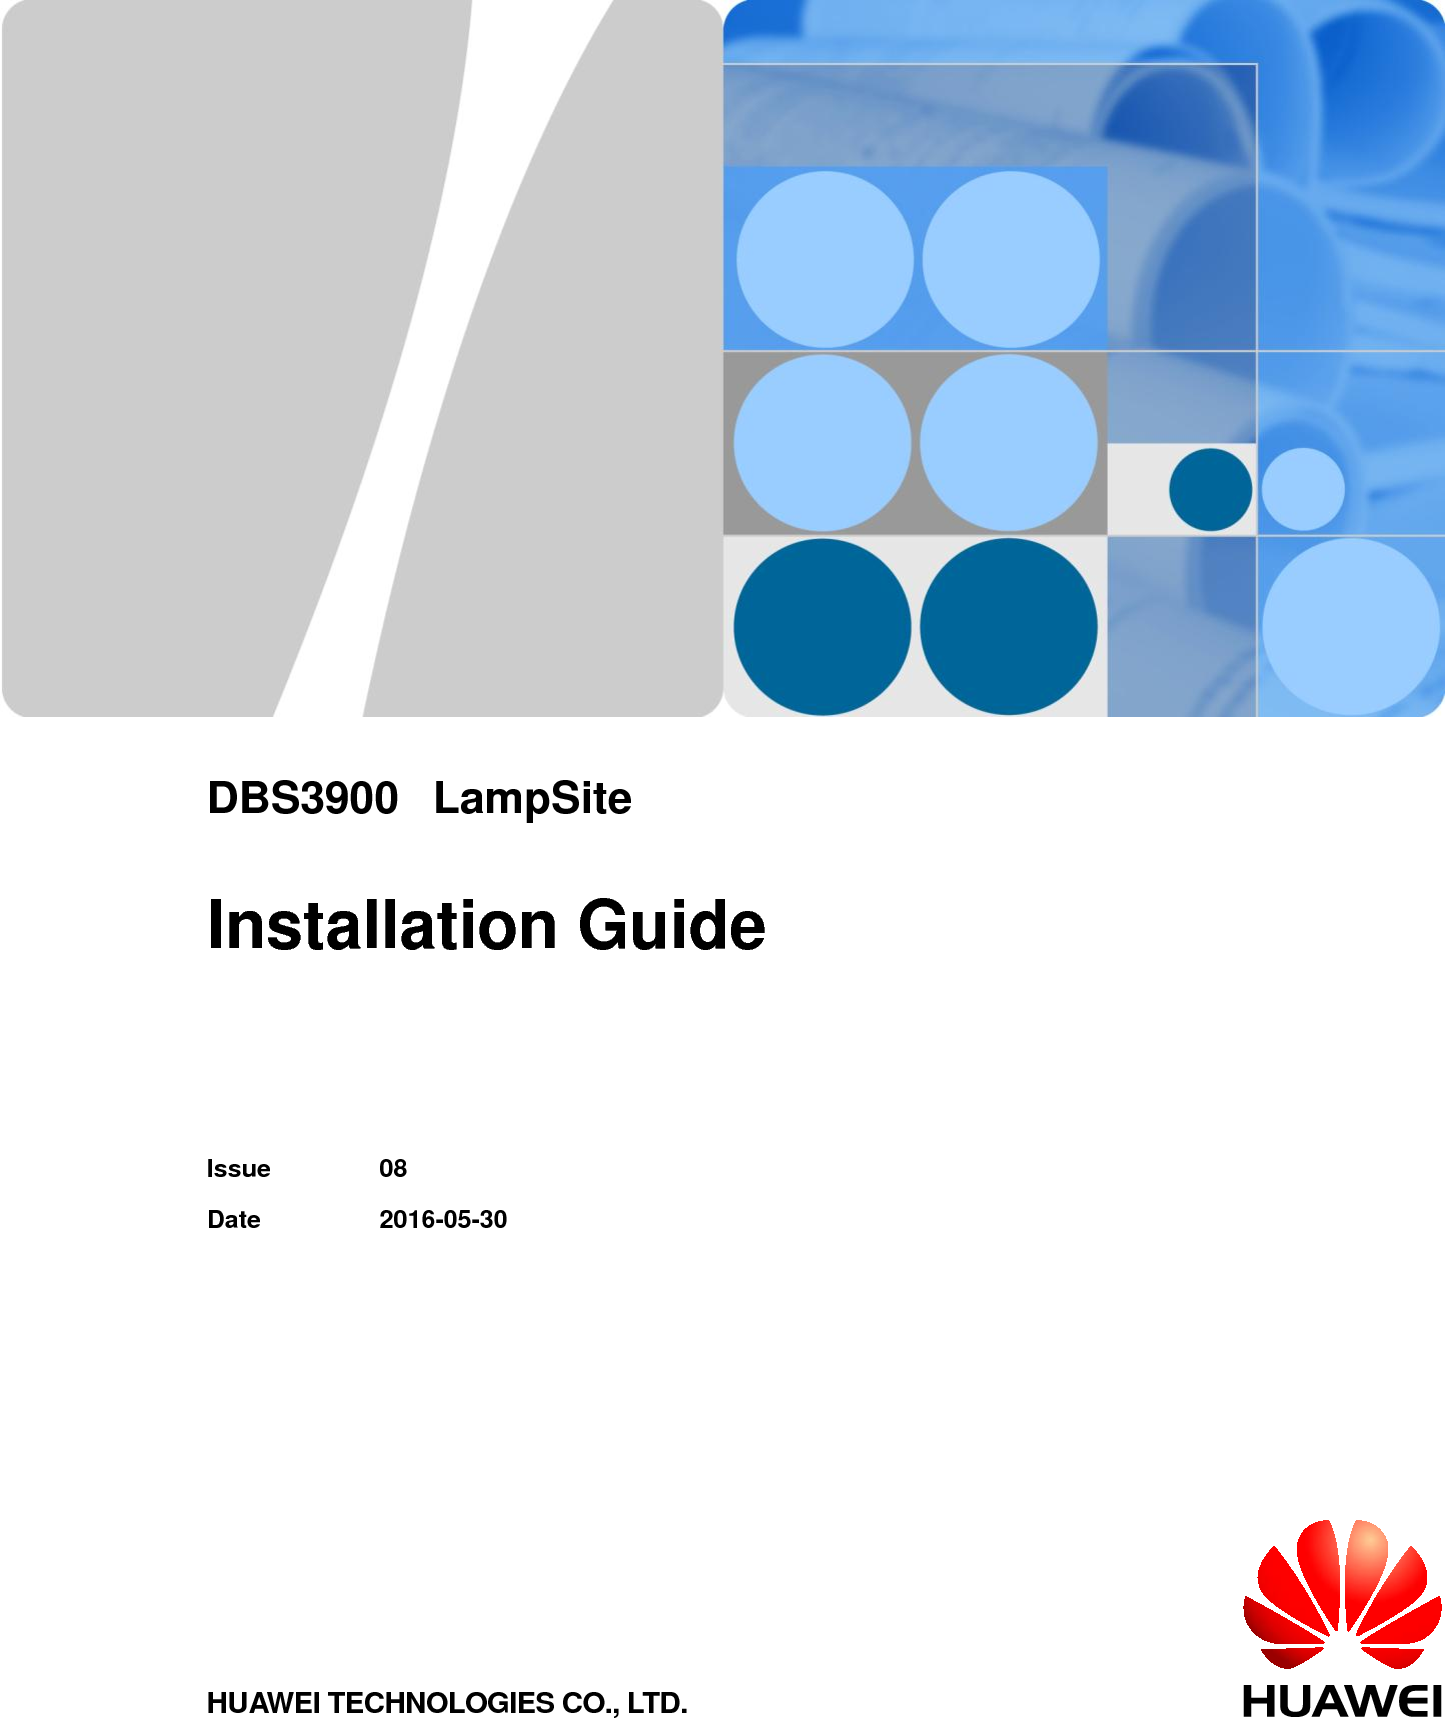           DBS3900LampSite  Installation Guide   Issue 08 Date 2016-05-30 HUAWEI TECHNOLOGIES CO., LTD. 